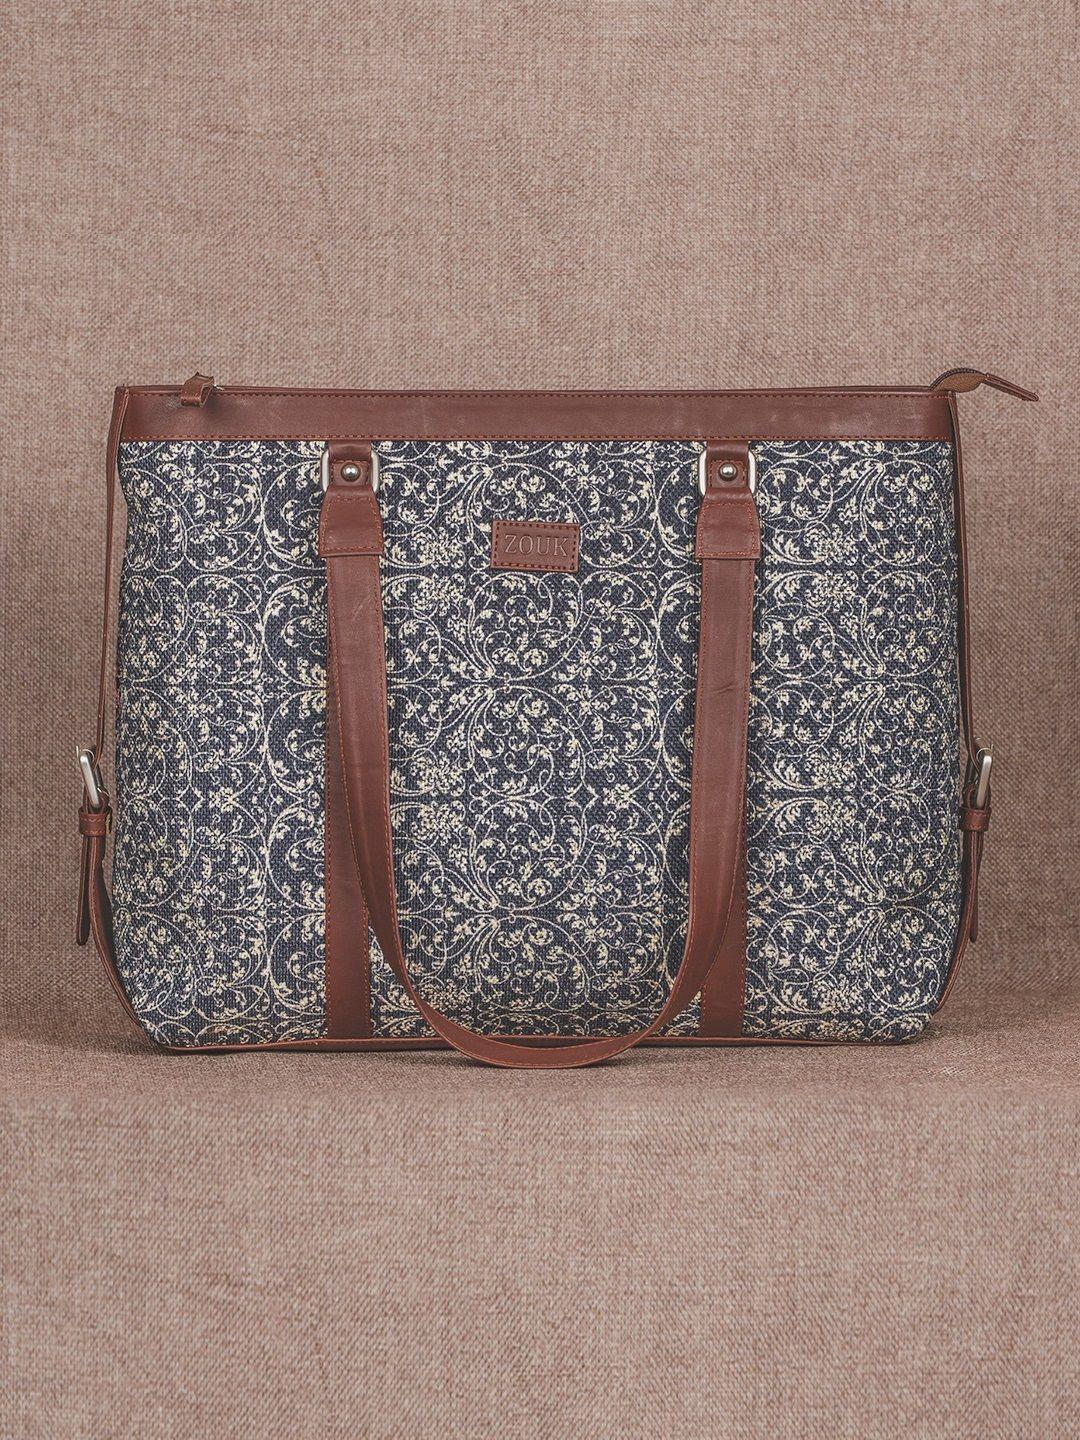 ZOUK Navy Blue & Beige Floral Print Leather Handcrafted 16 Inch Laptop Sustainable Shoulder Bag